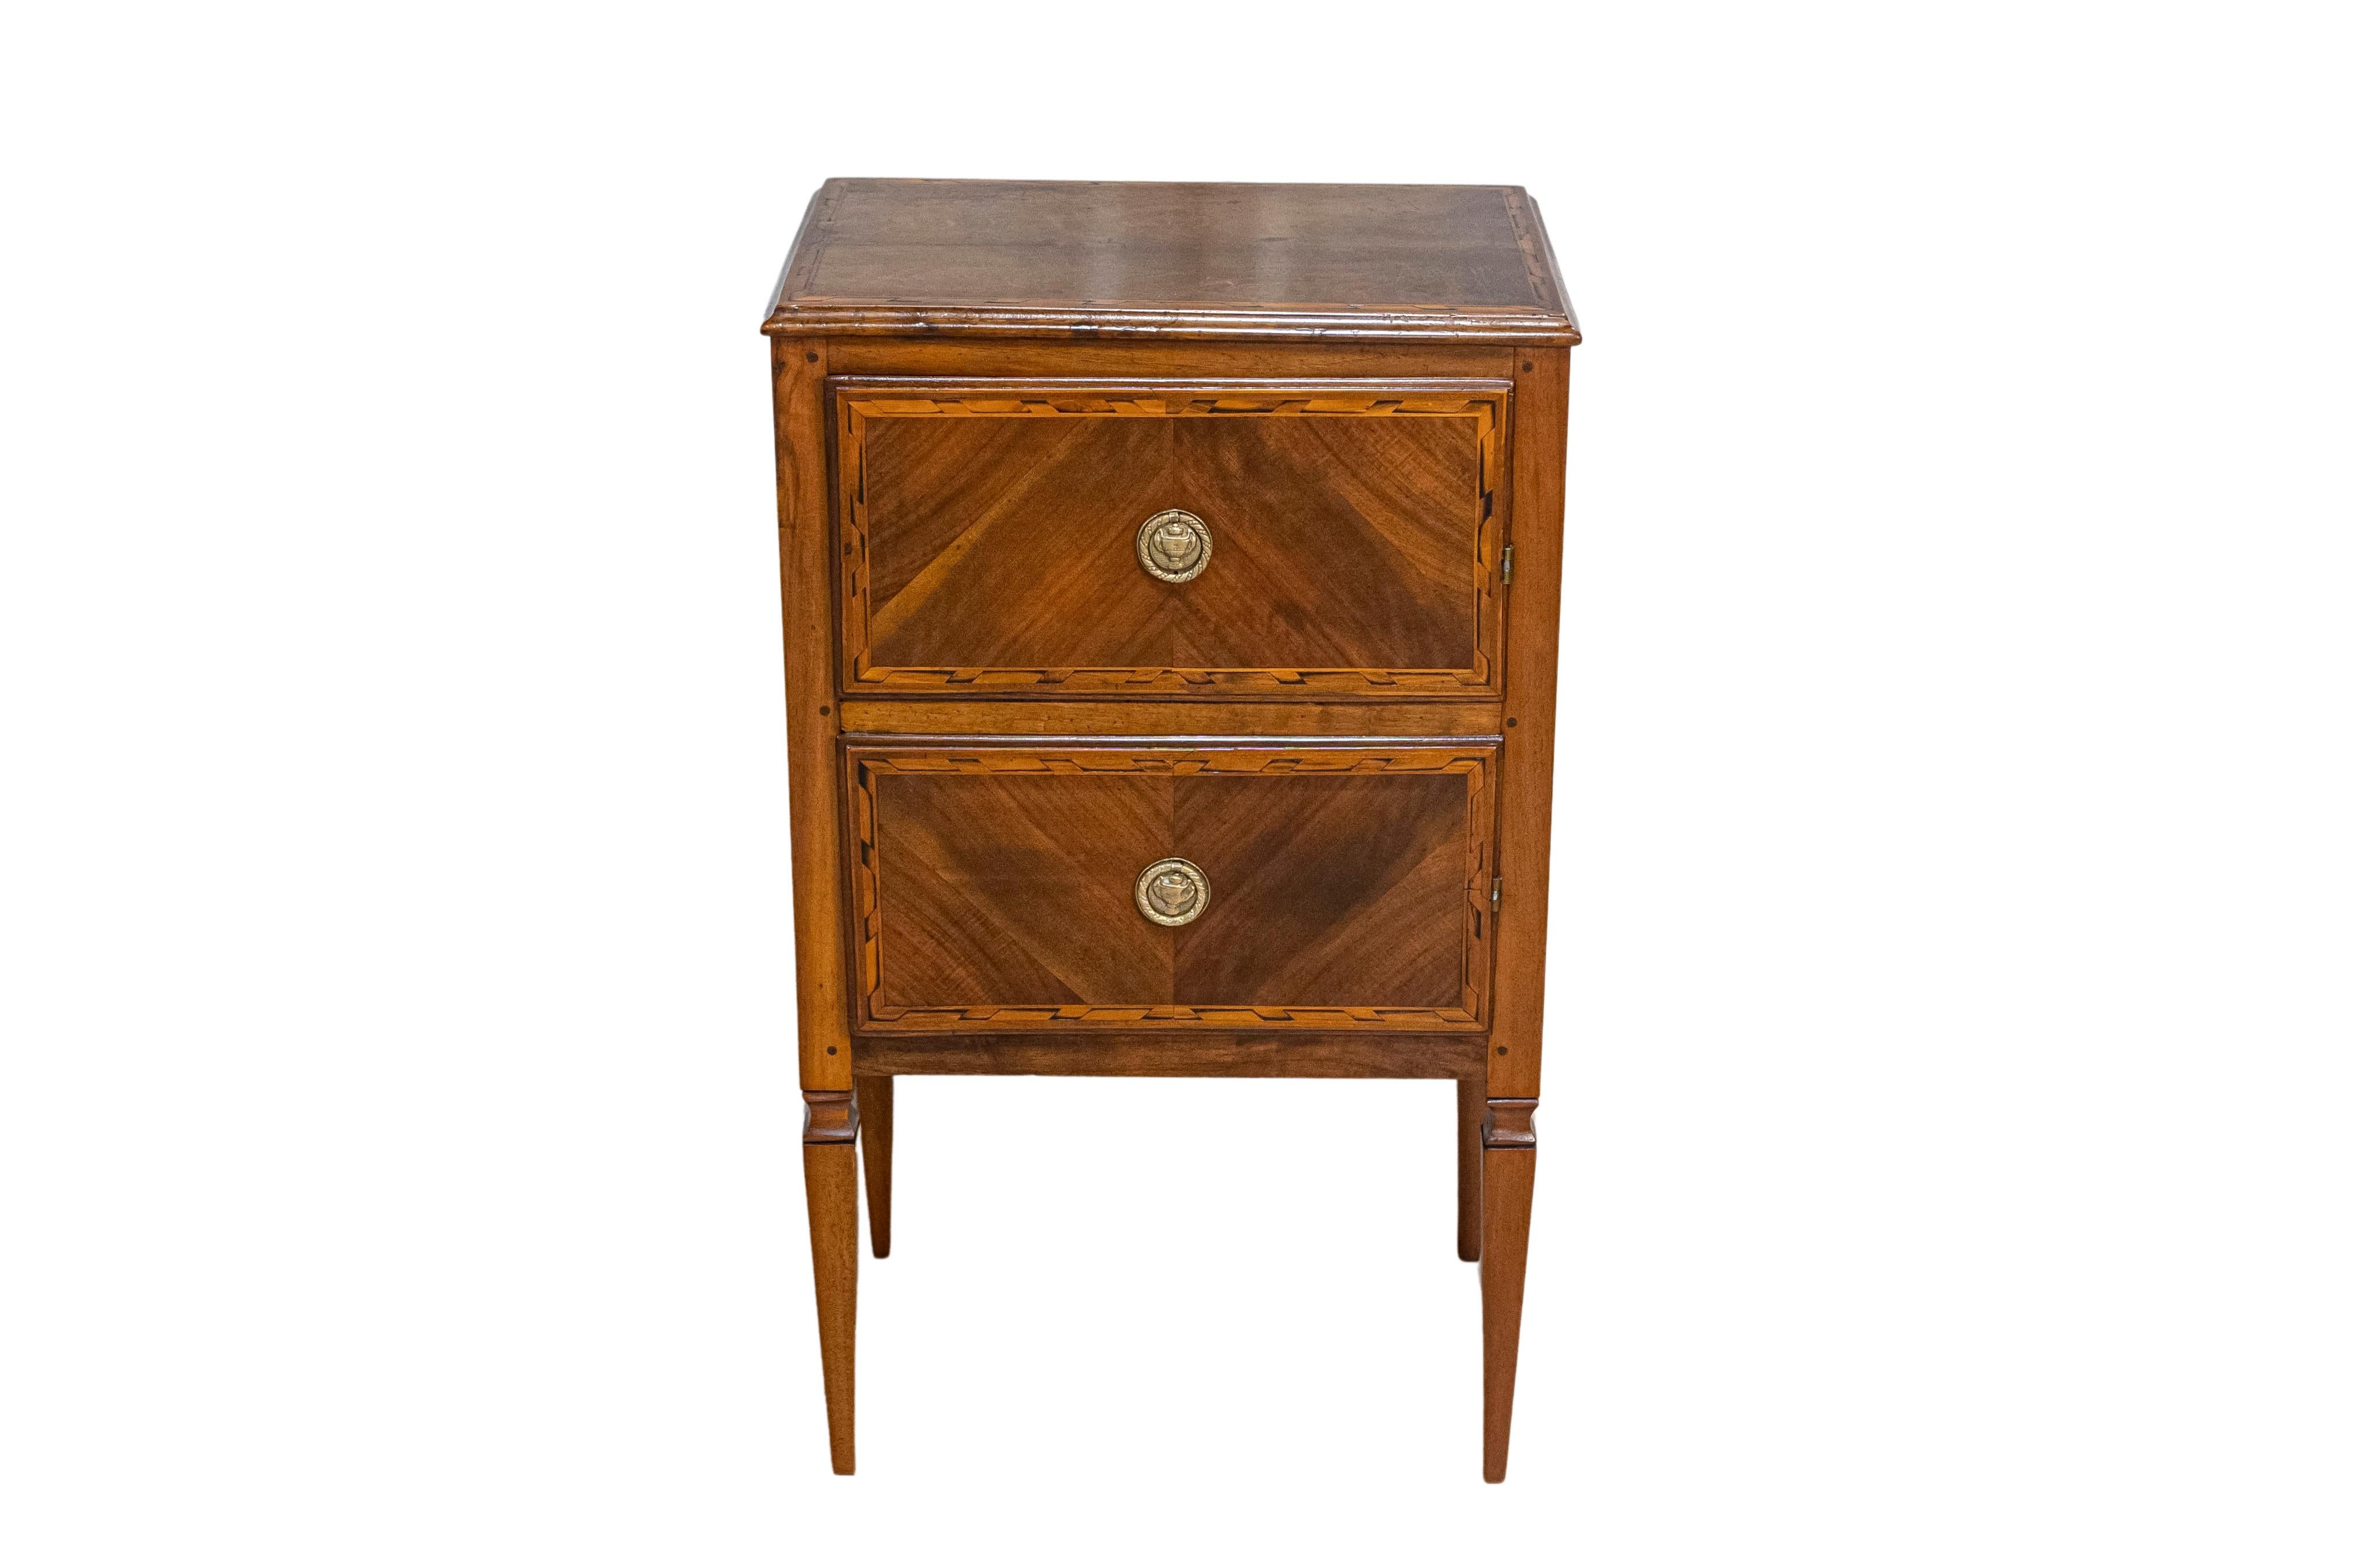 A pair of Italian Neoclassical style walnut bedside chests from the 19th century with two drawers and tapered legs. Crafted during the 19th century in Italy, this pair of Neoclassical nightstands exudes timeless elegance. Their walnut construction